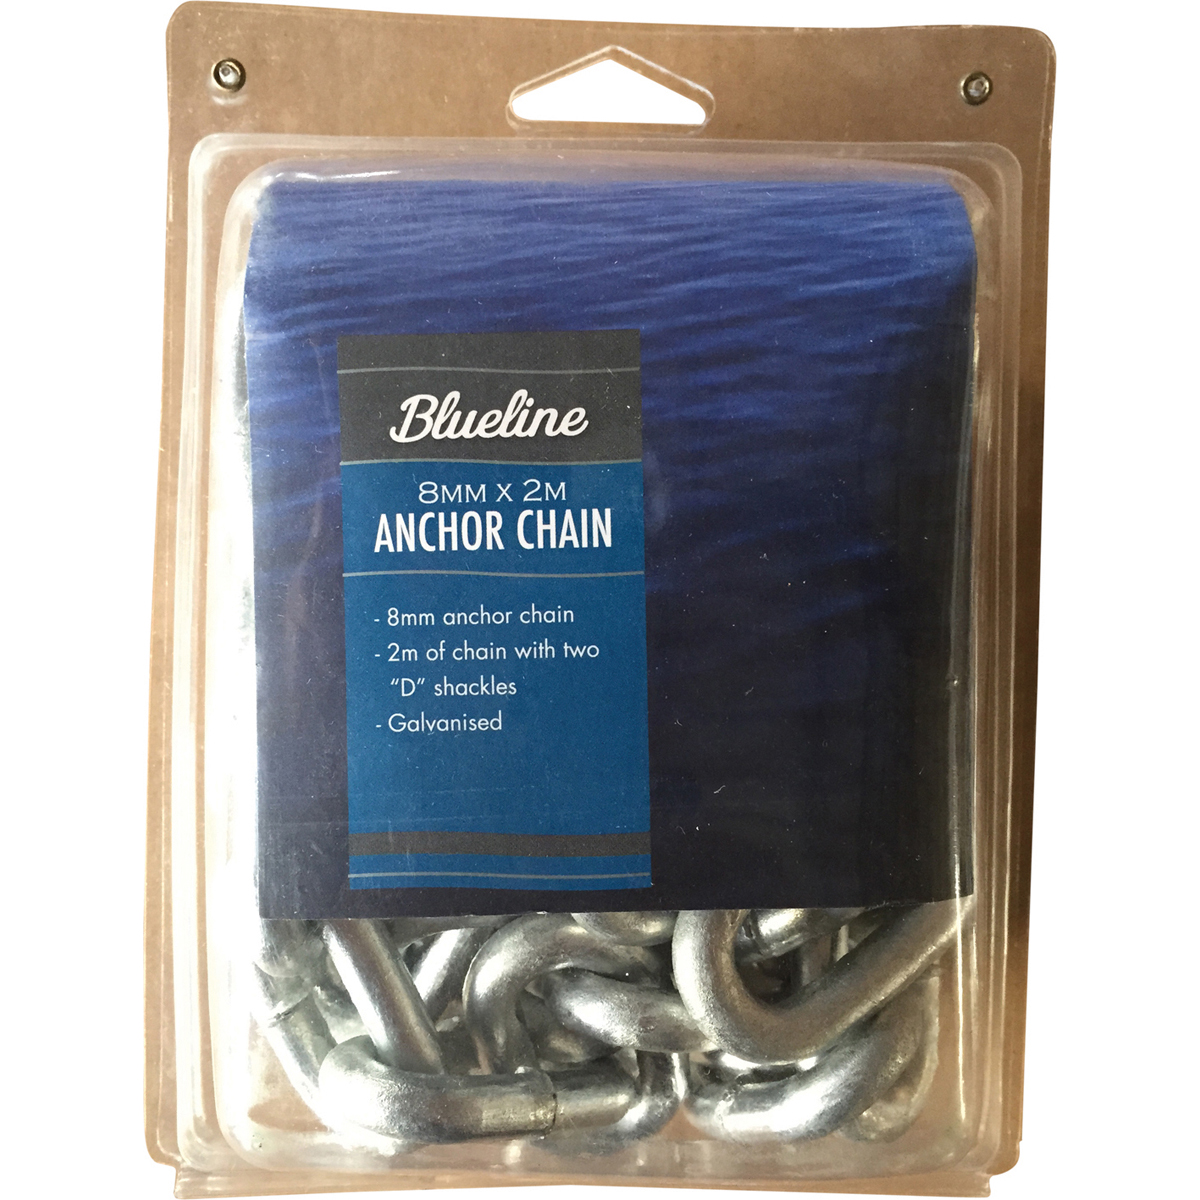 Blueline Anchor Chain with Shackles 8mm x 2m